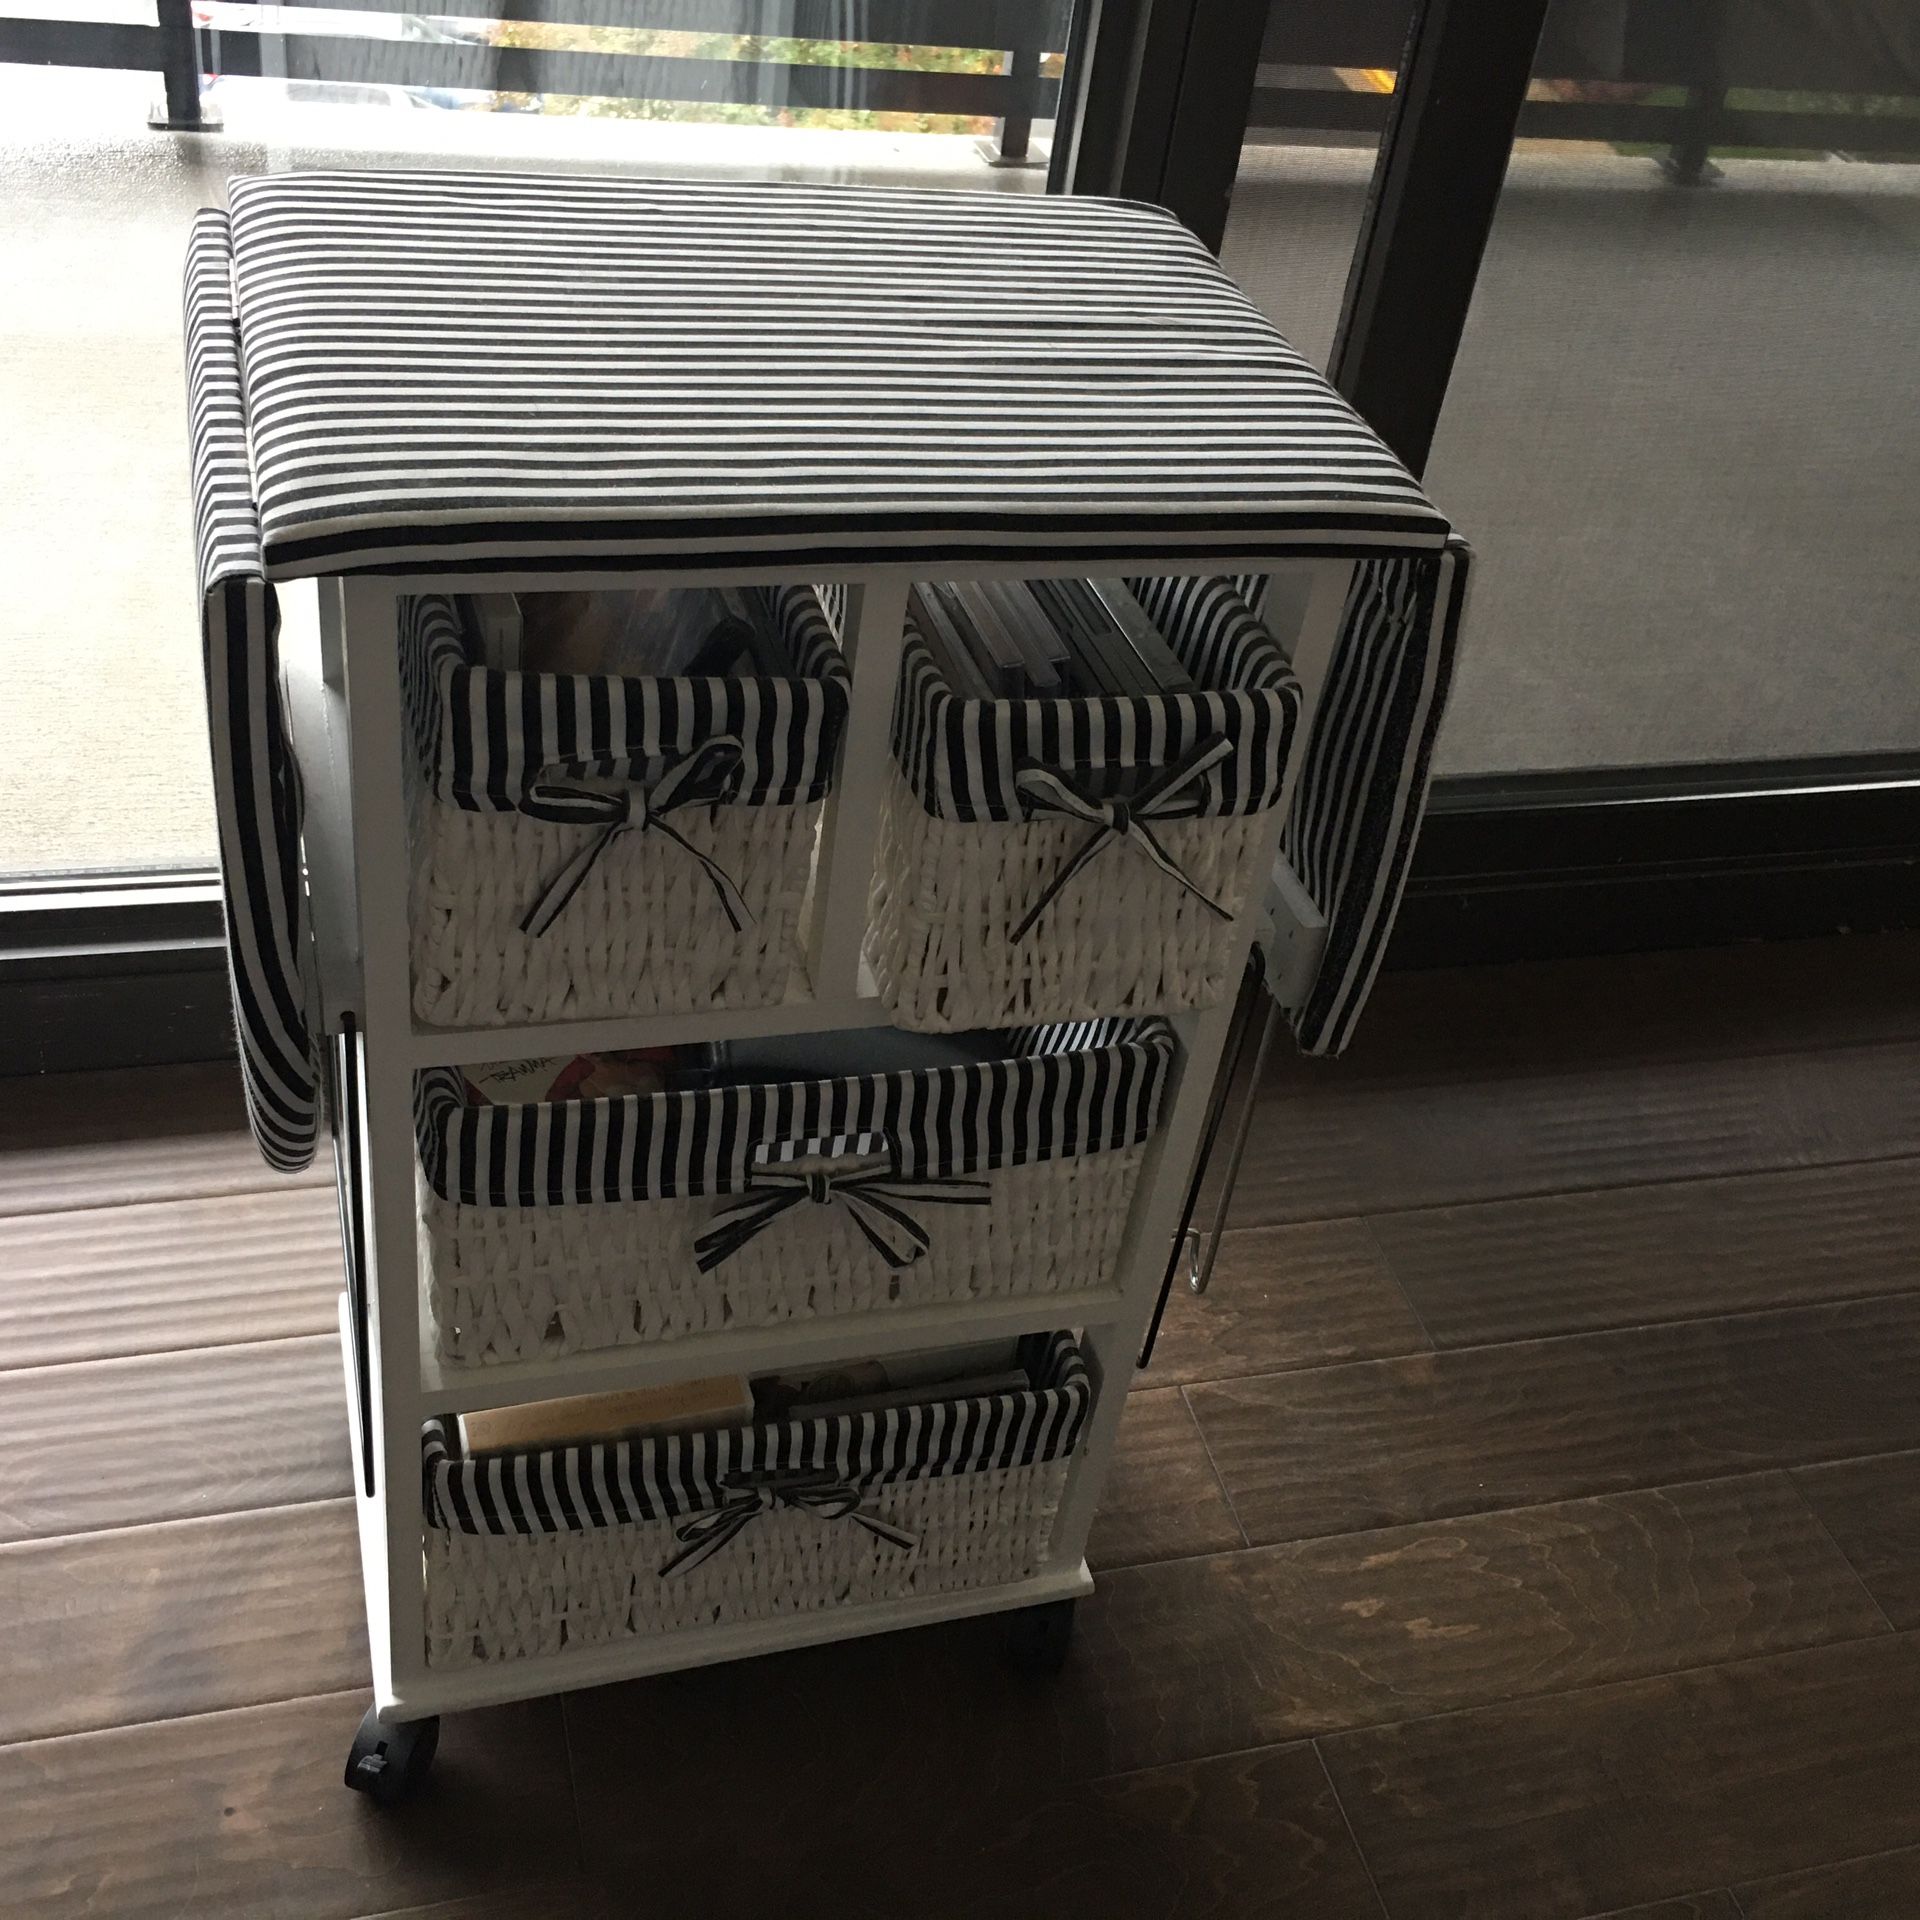 Ironing table as well as ironing baskets case - $20